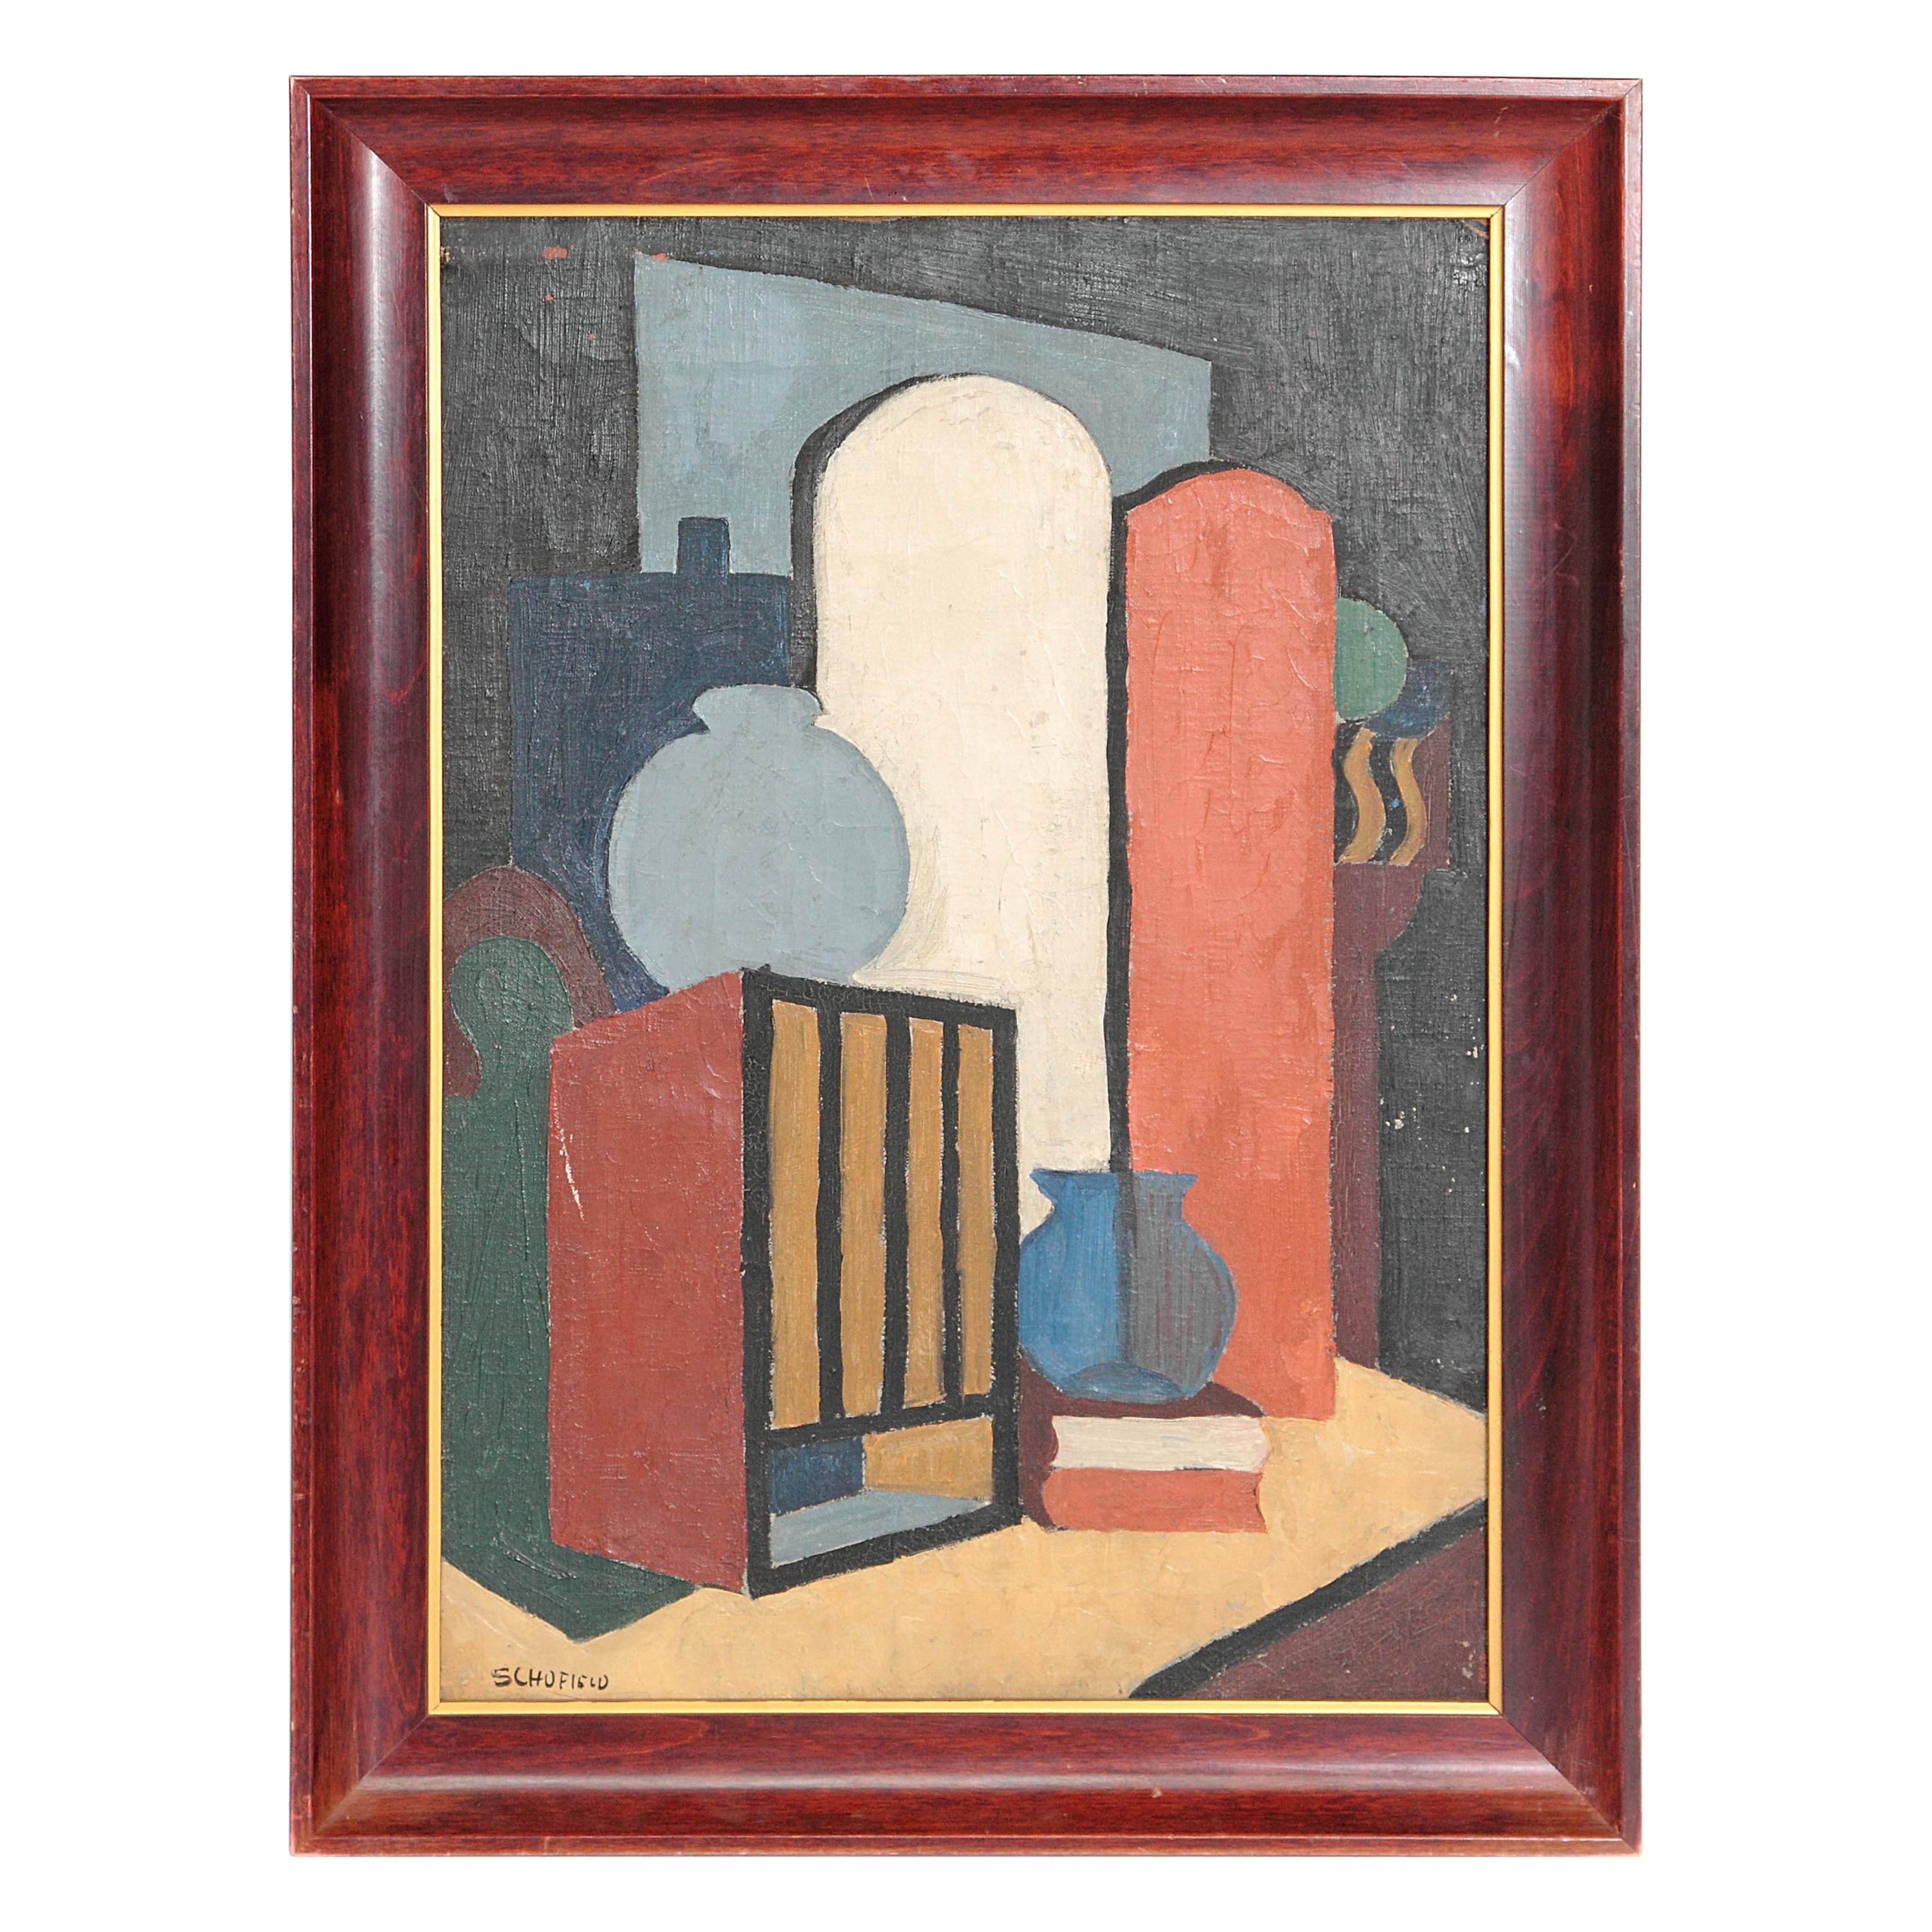 20th Century American Abstract Still Life by Flora Scofield, Oil on Canvas